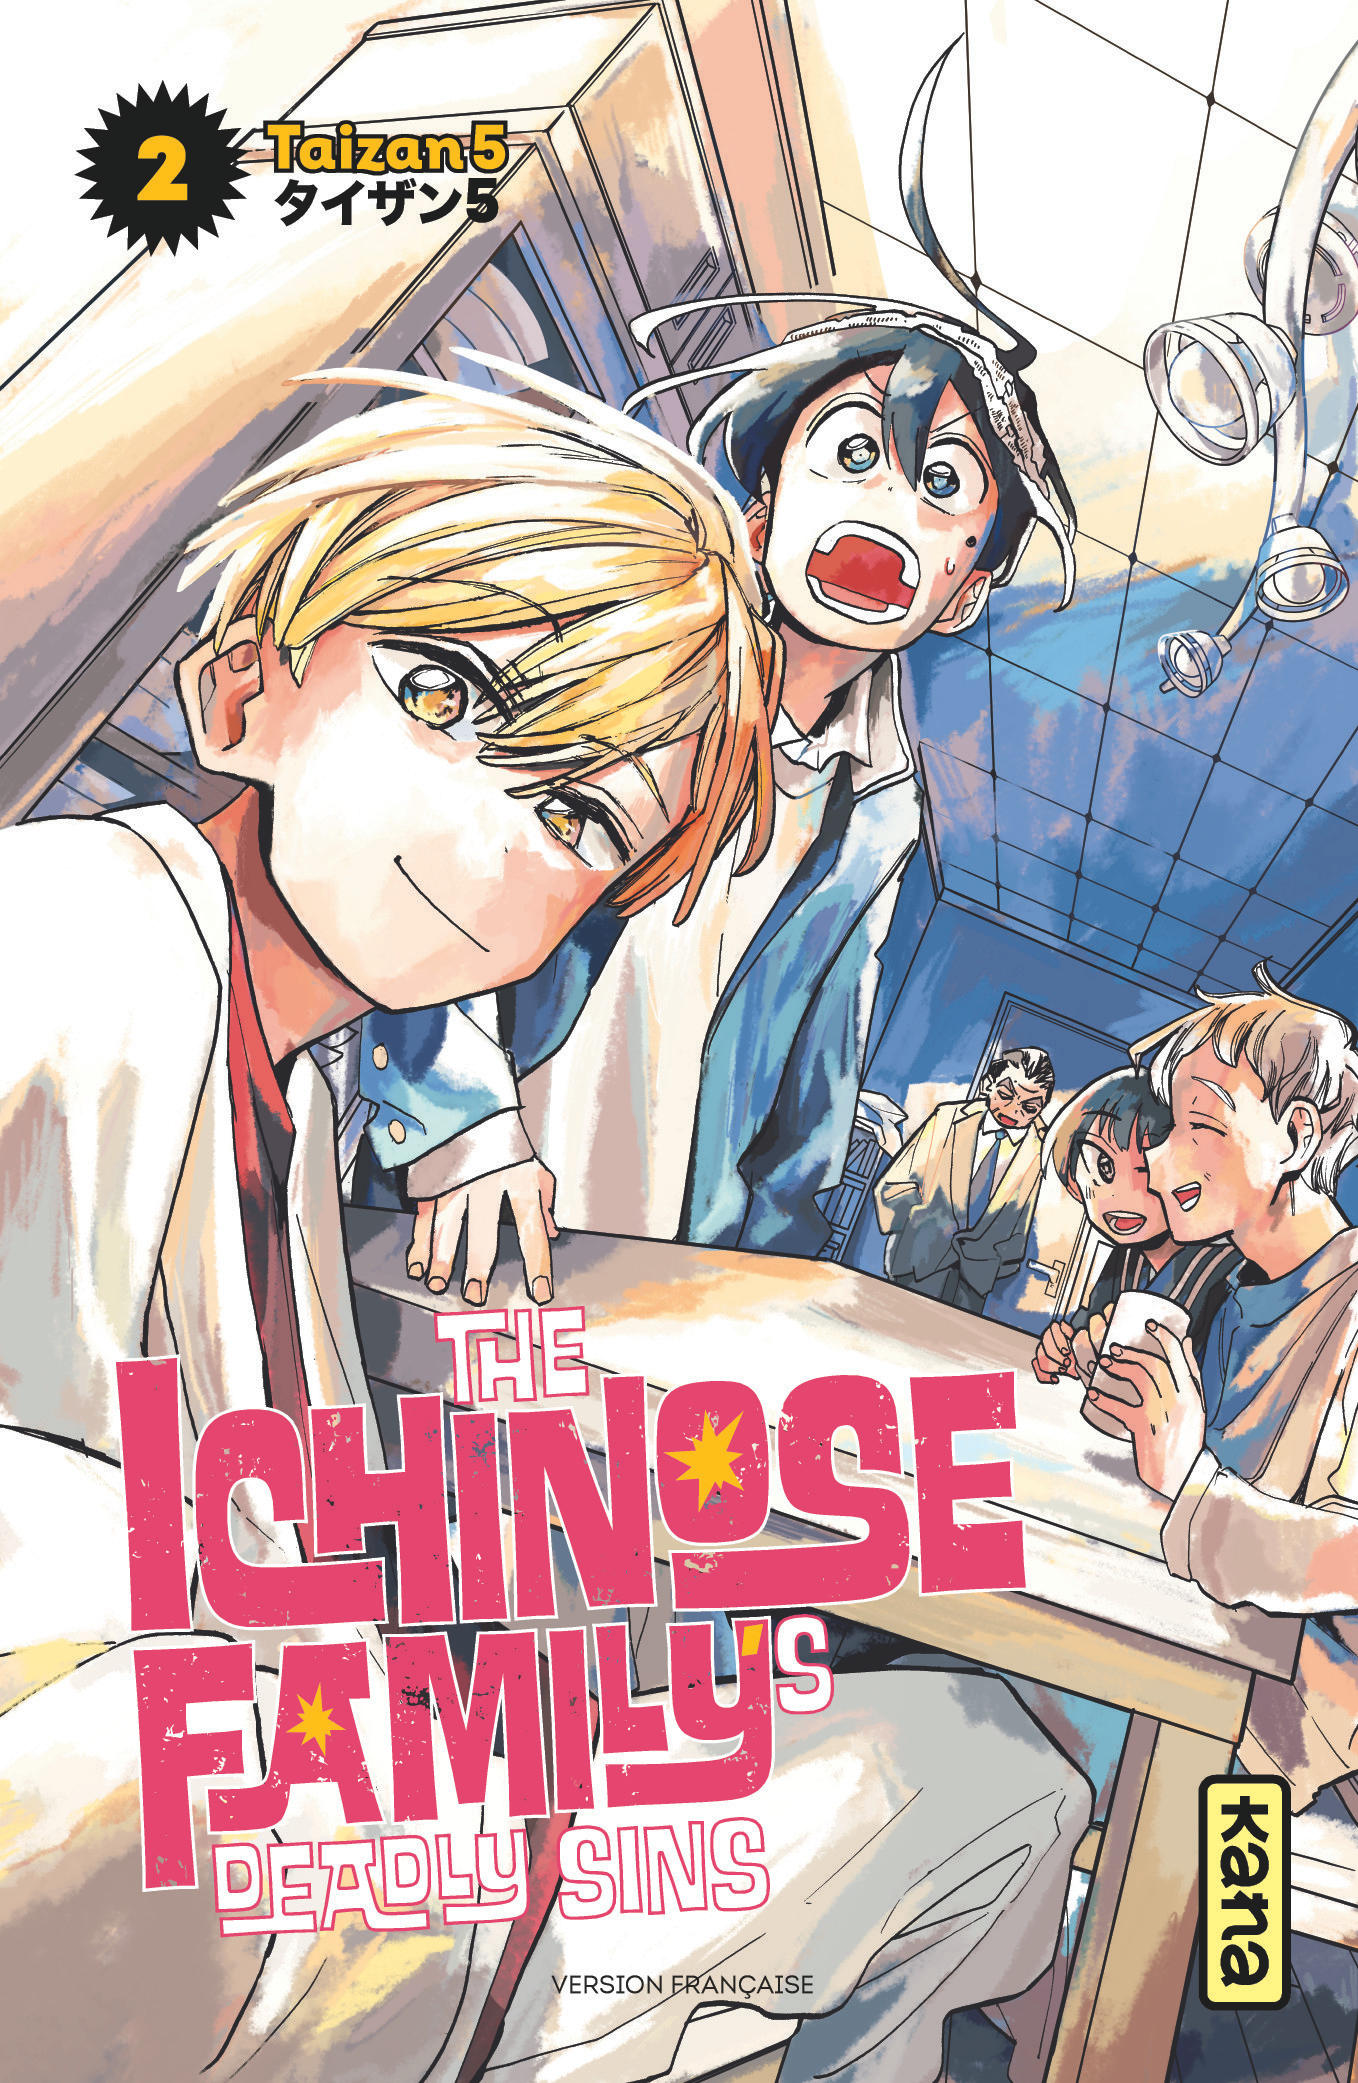 The Ichinose Family's Deadly Sins – Tome 2 - couv